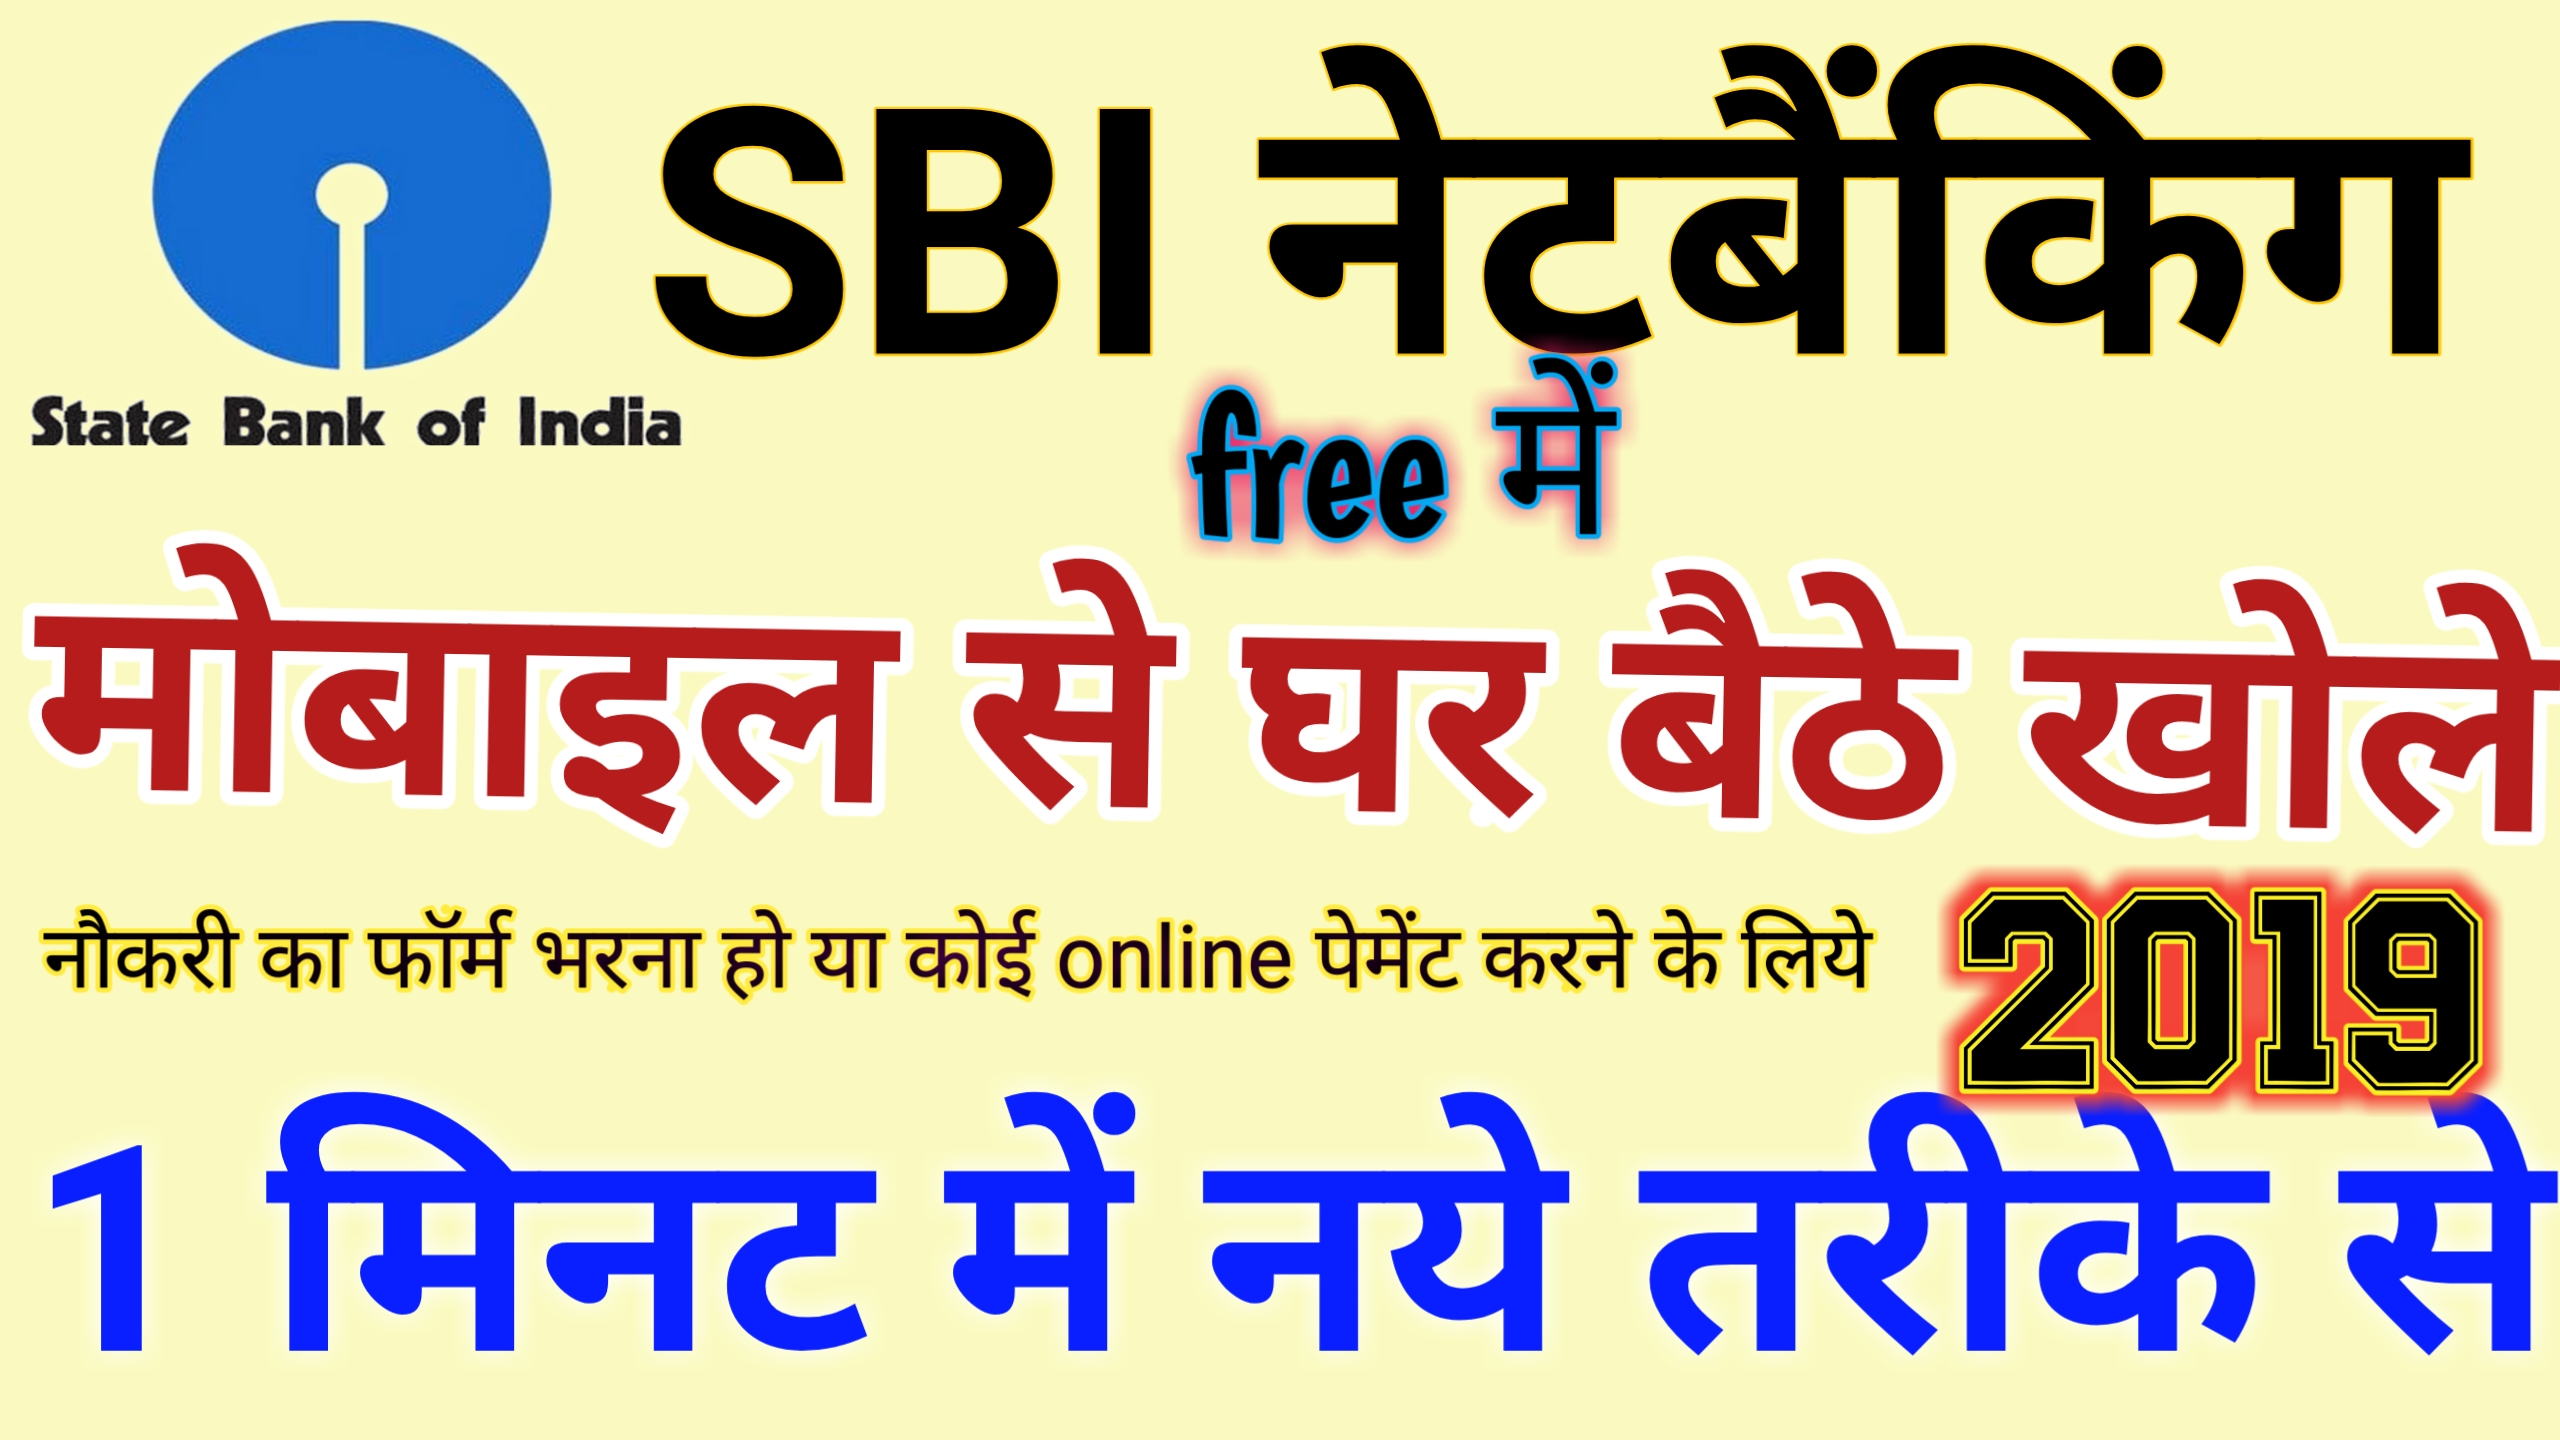 how to open Online Sbi Netbankig । Internet Banking open without going branch